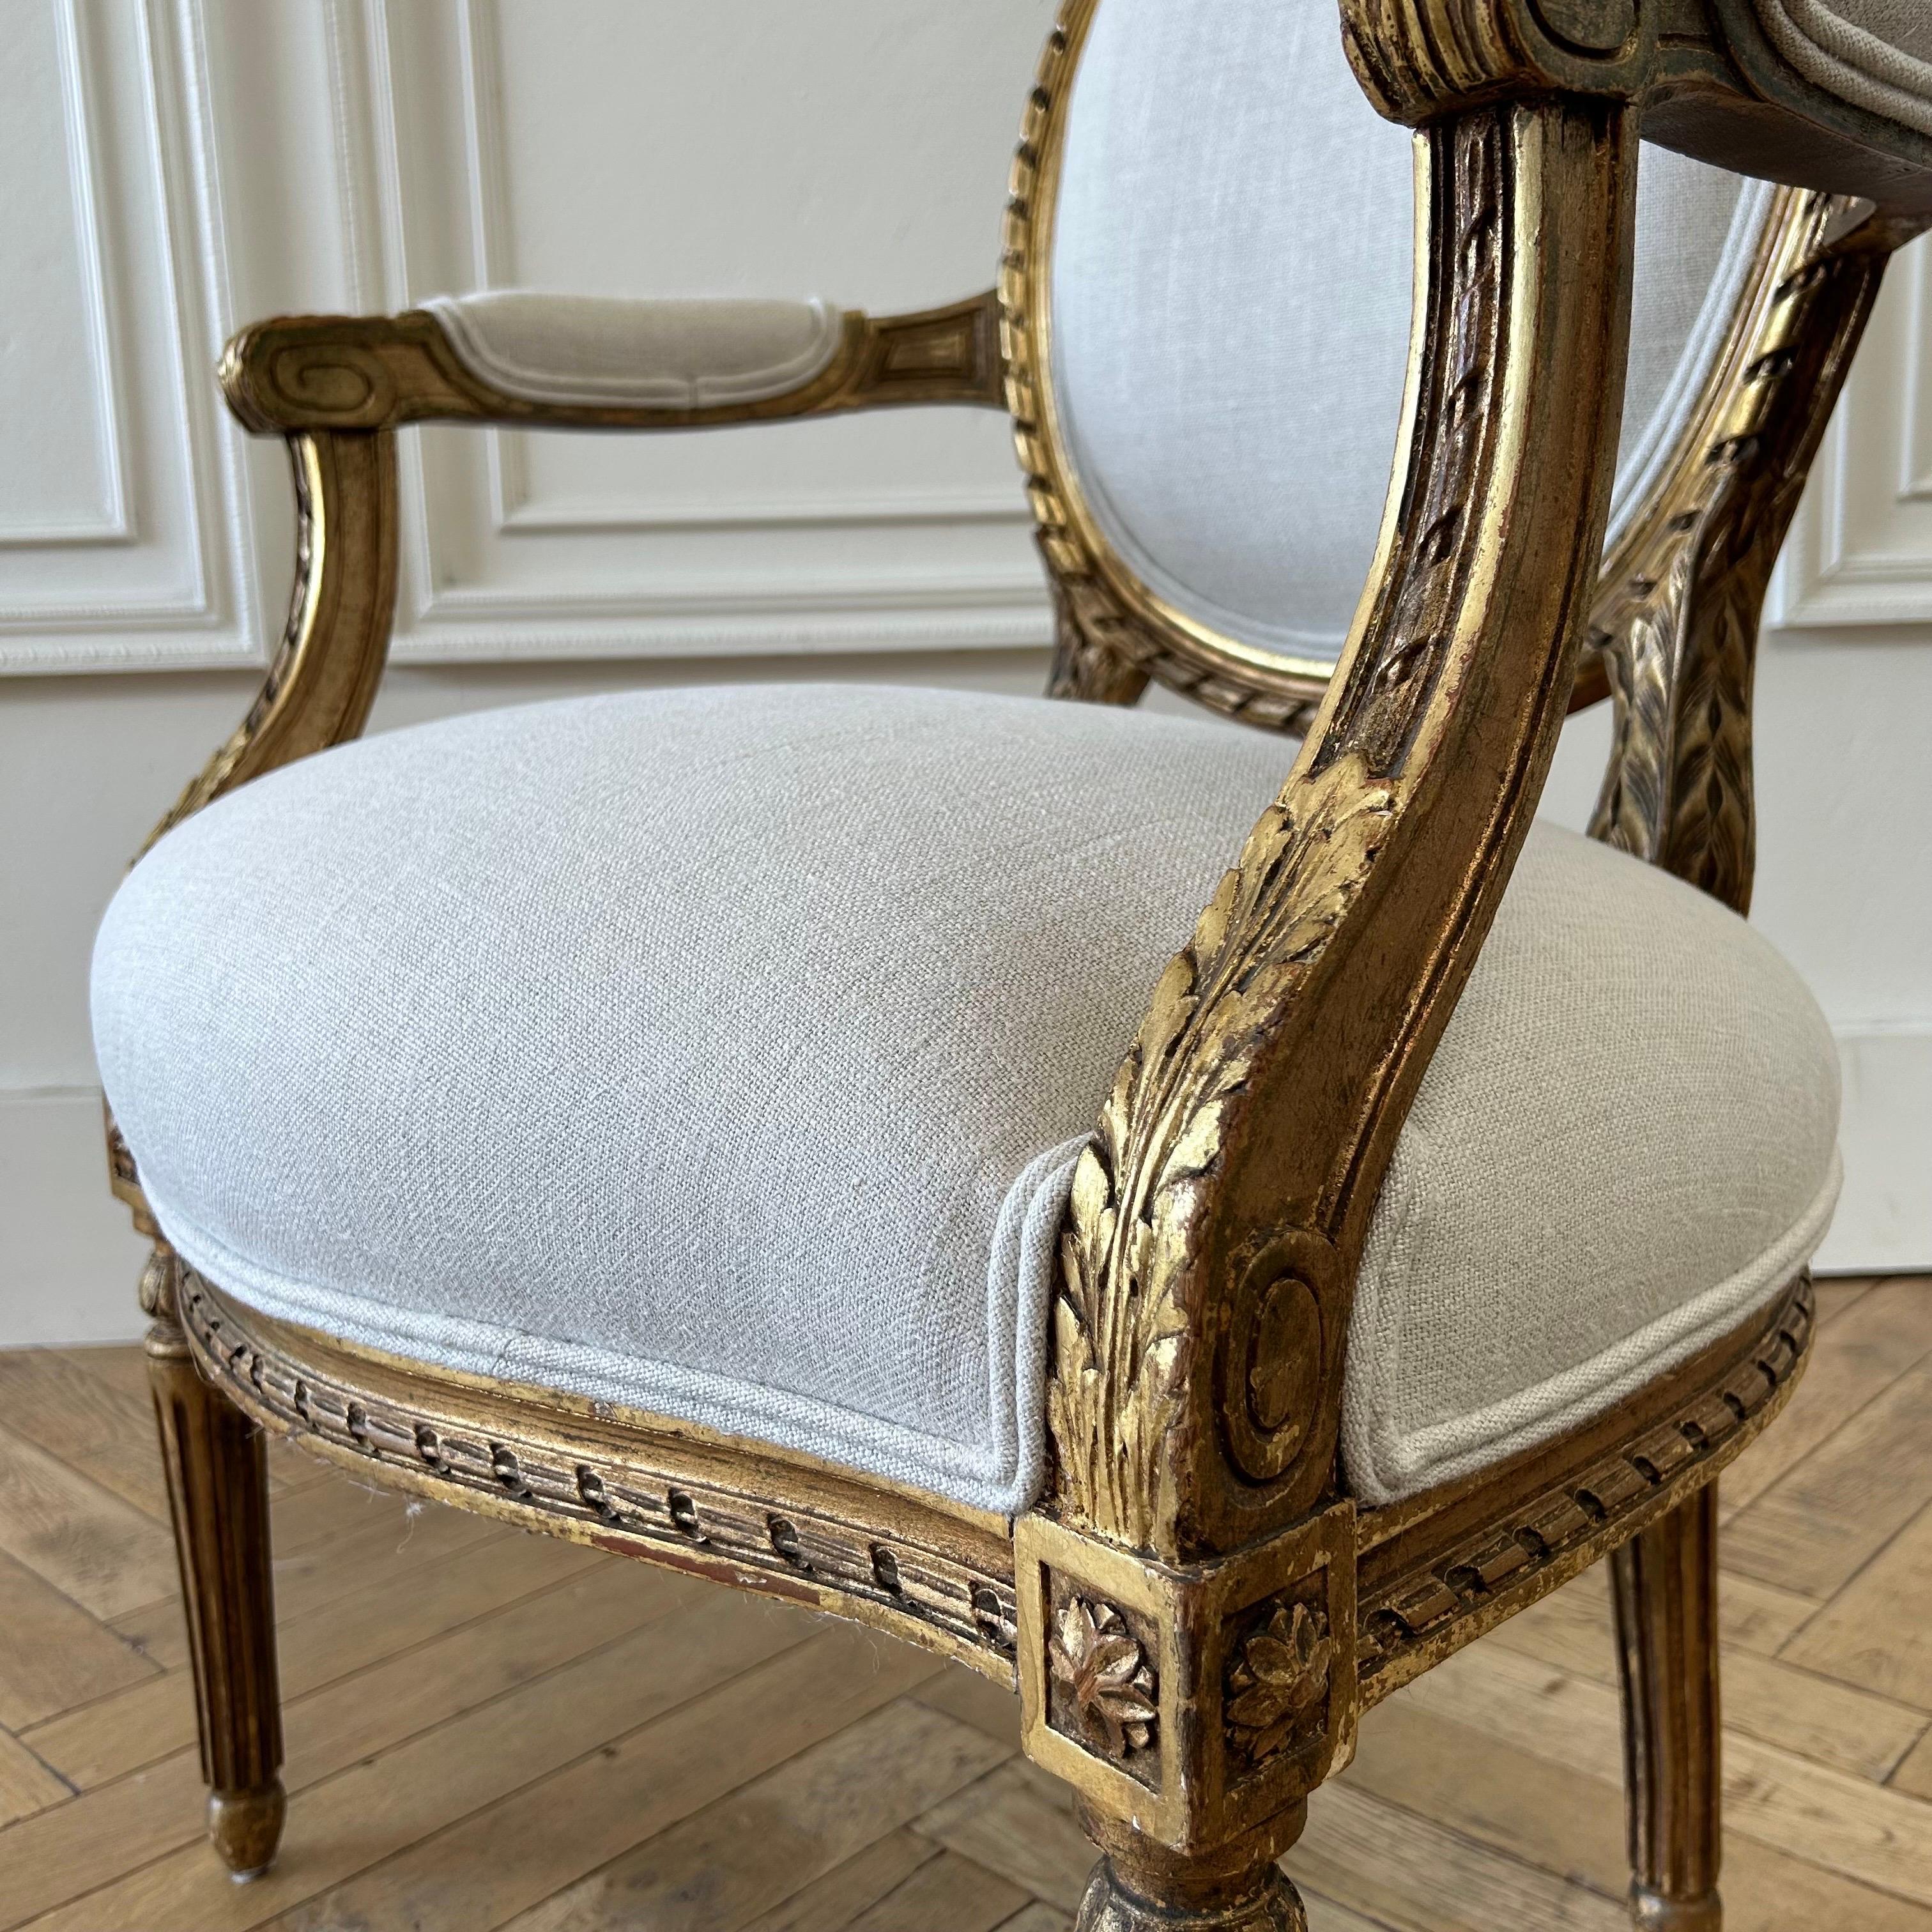 Antique French Louis XVI Style Gilt Wood Upholstered Linen Arm Chairs For Sale 4